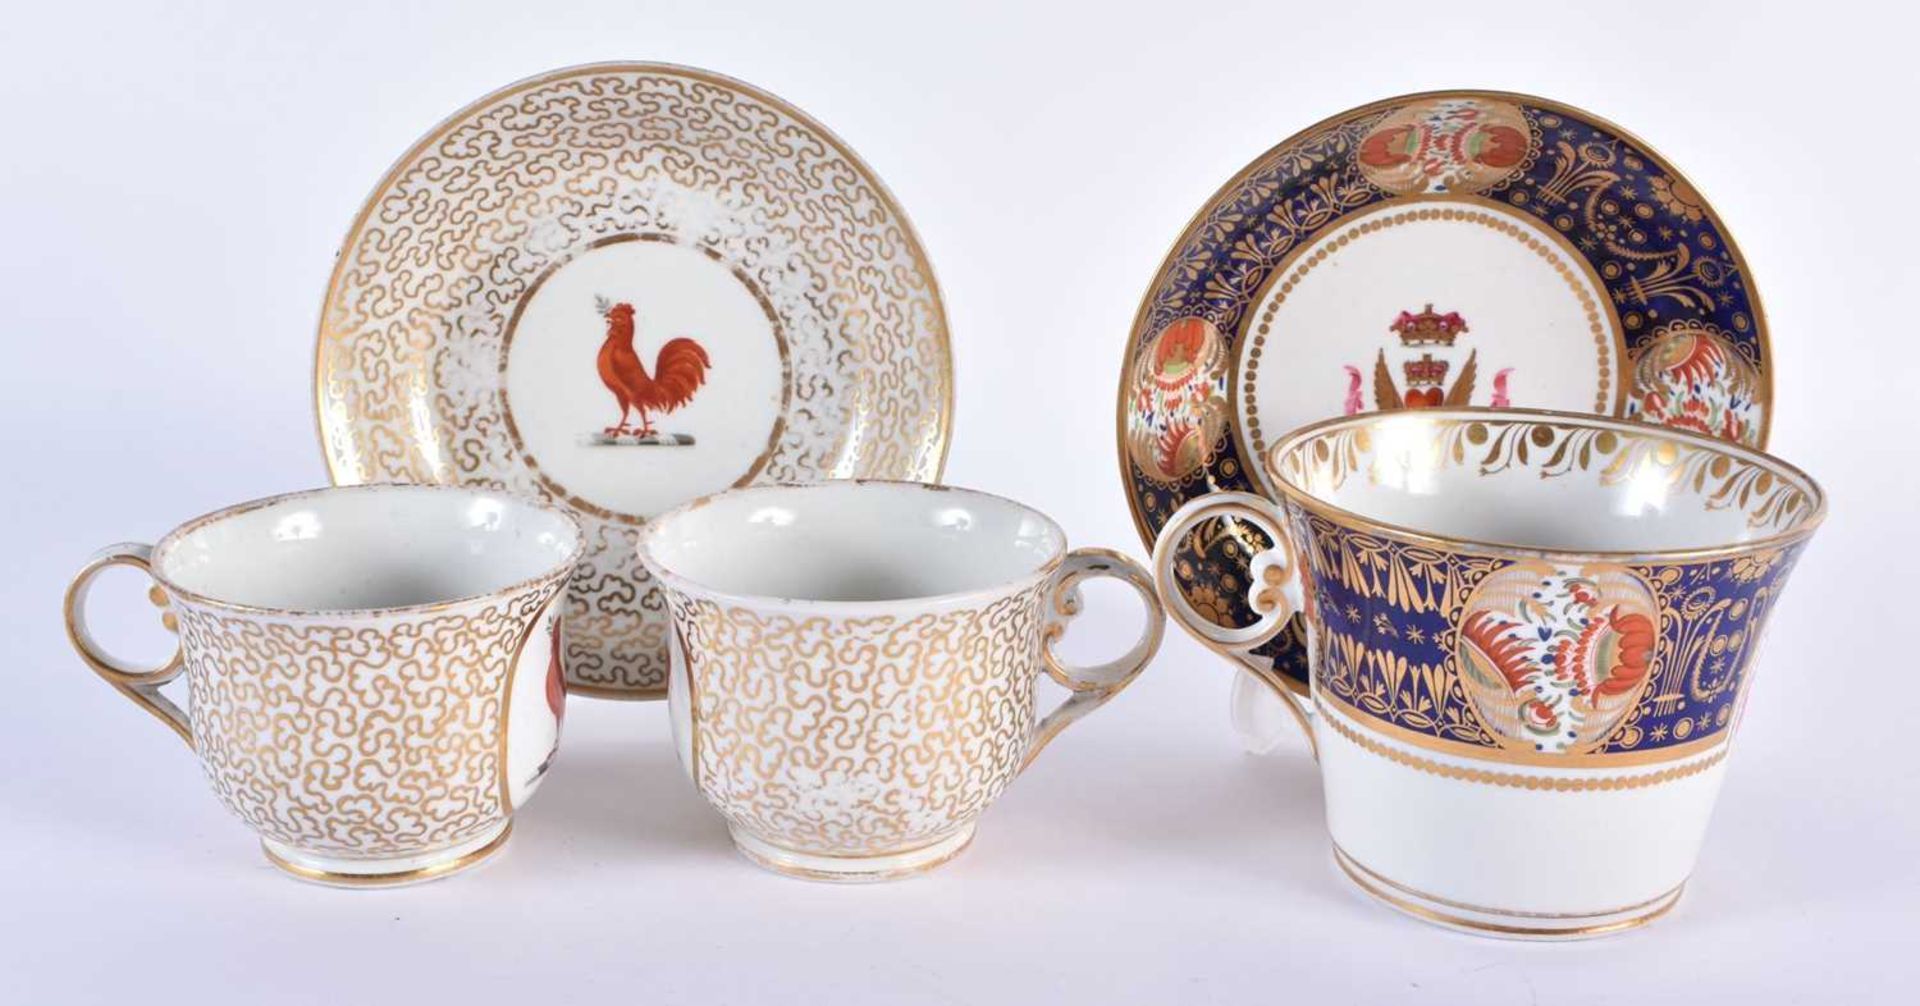 TWO LATE 18TH/19TH CENTURY CHAMBERLAINS WORCESTER CUPS AND SAUCERS one painted with an armorial, the